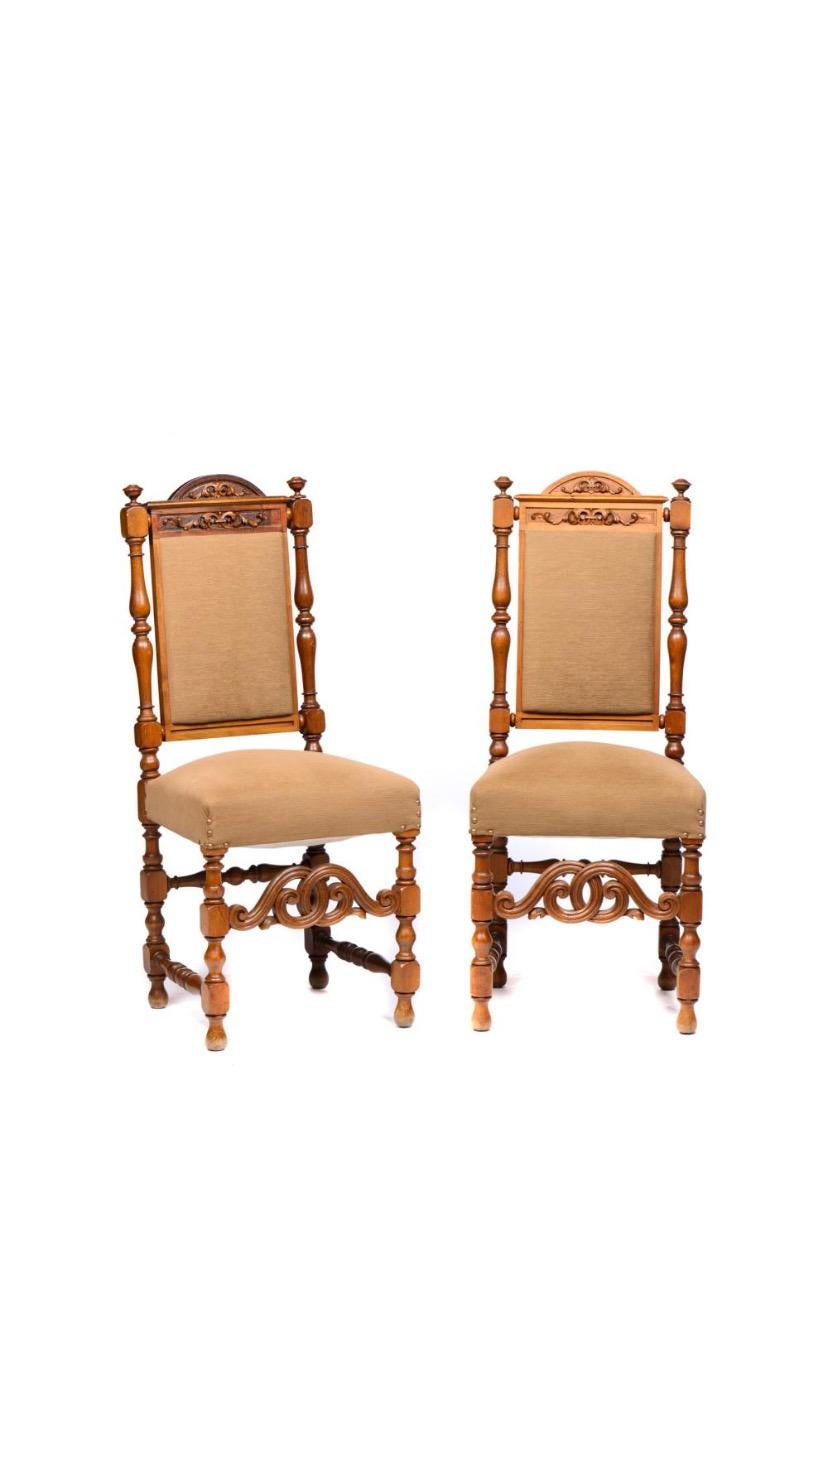 Set of 16 Portuguese Wooden Chairs, circa 19th Century For Sale 6